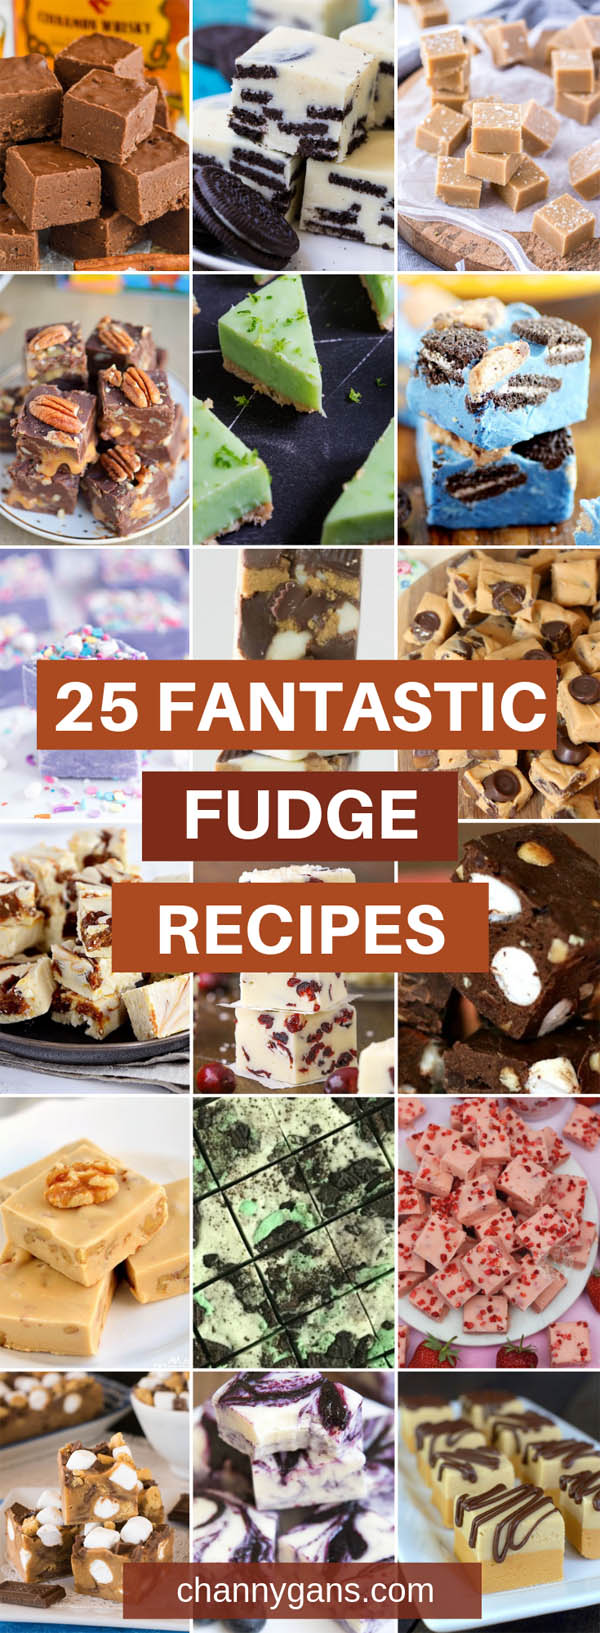 25 Fantastic Fudge Recipes. If you are looking for something to satisfy your sweet tooth or looking for a sweet treat to gift to someone, these fantastic fudge recipes are for you!